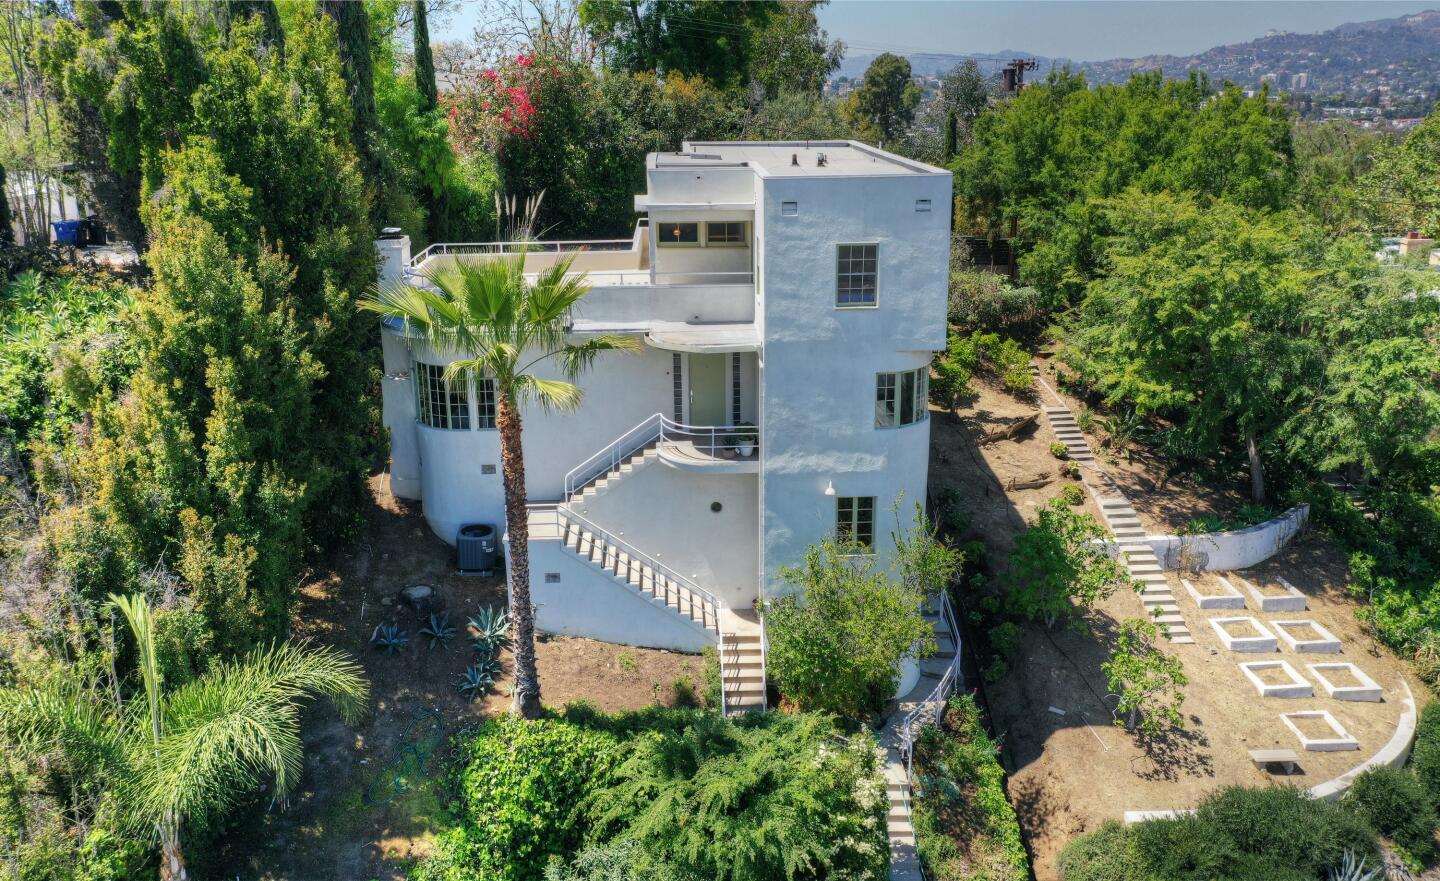 The scenic, three-story home was built in 1938 by architect Saul Harris Brown as a personal residence for himself.